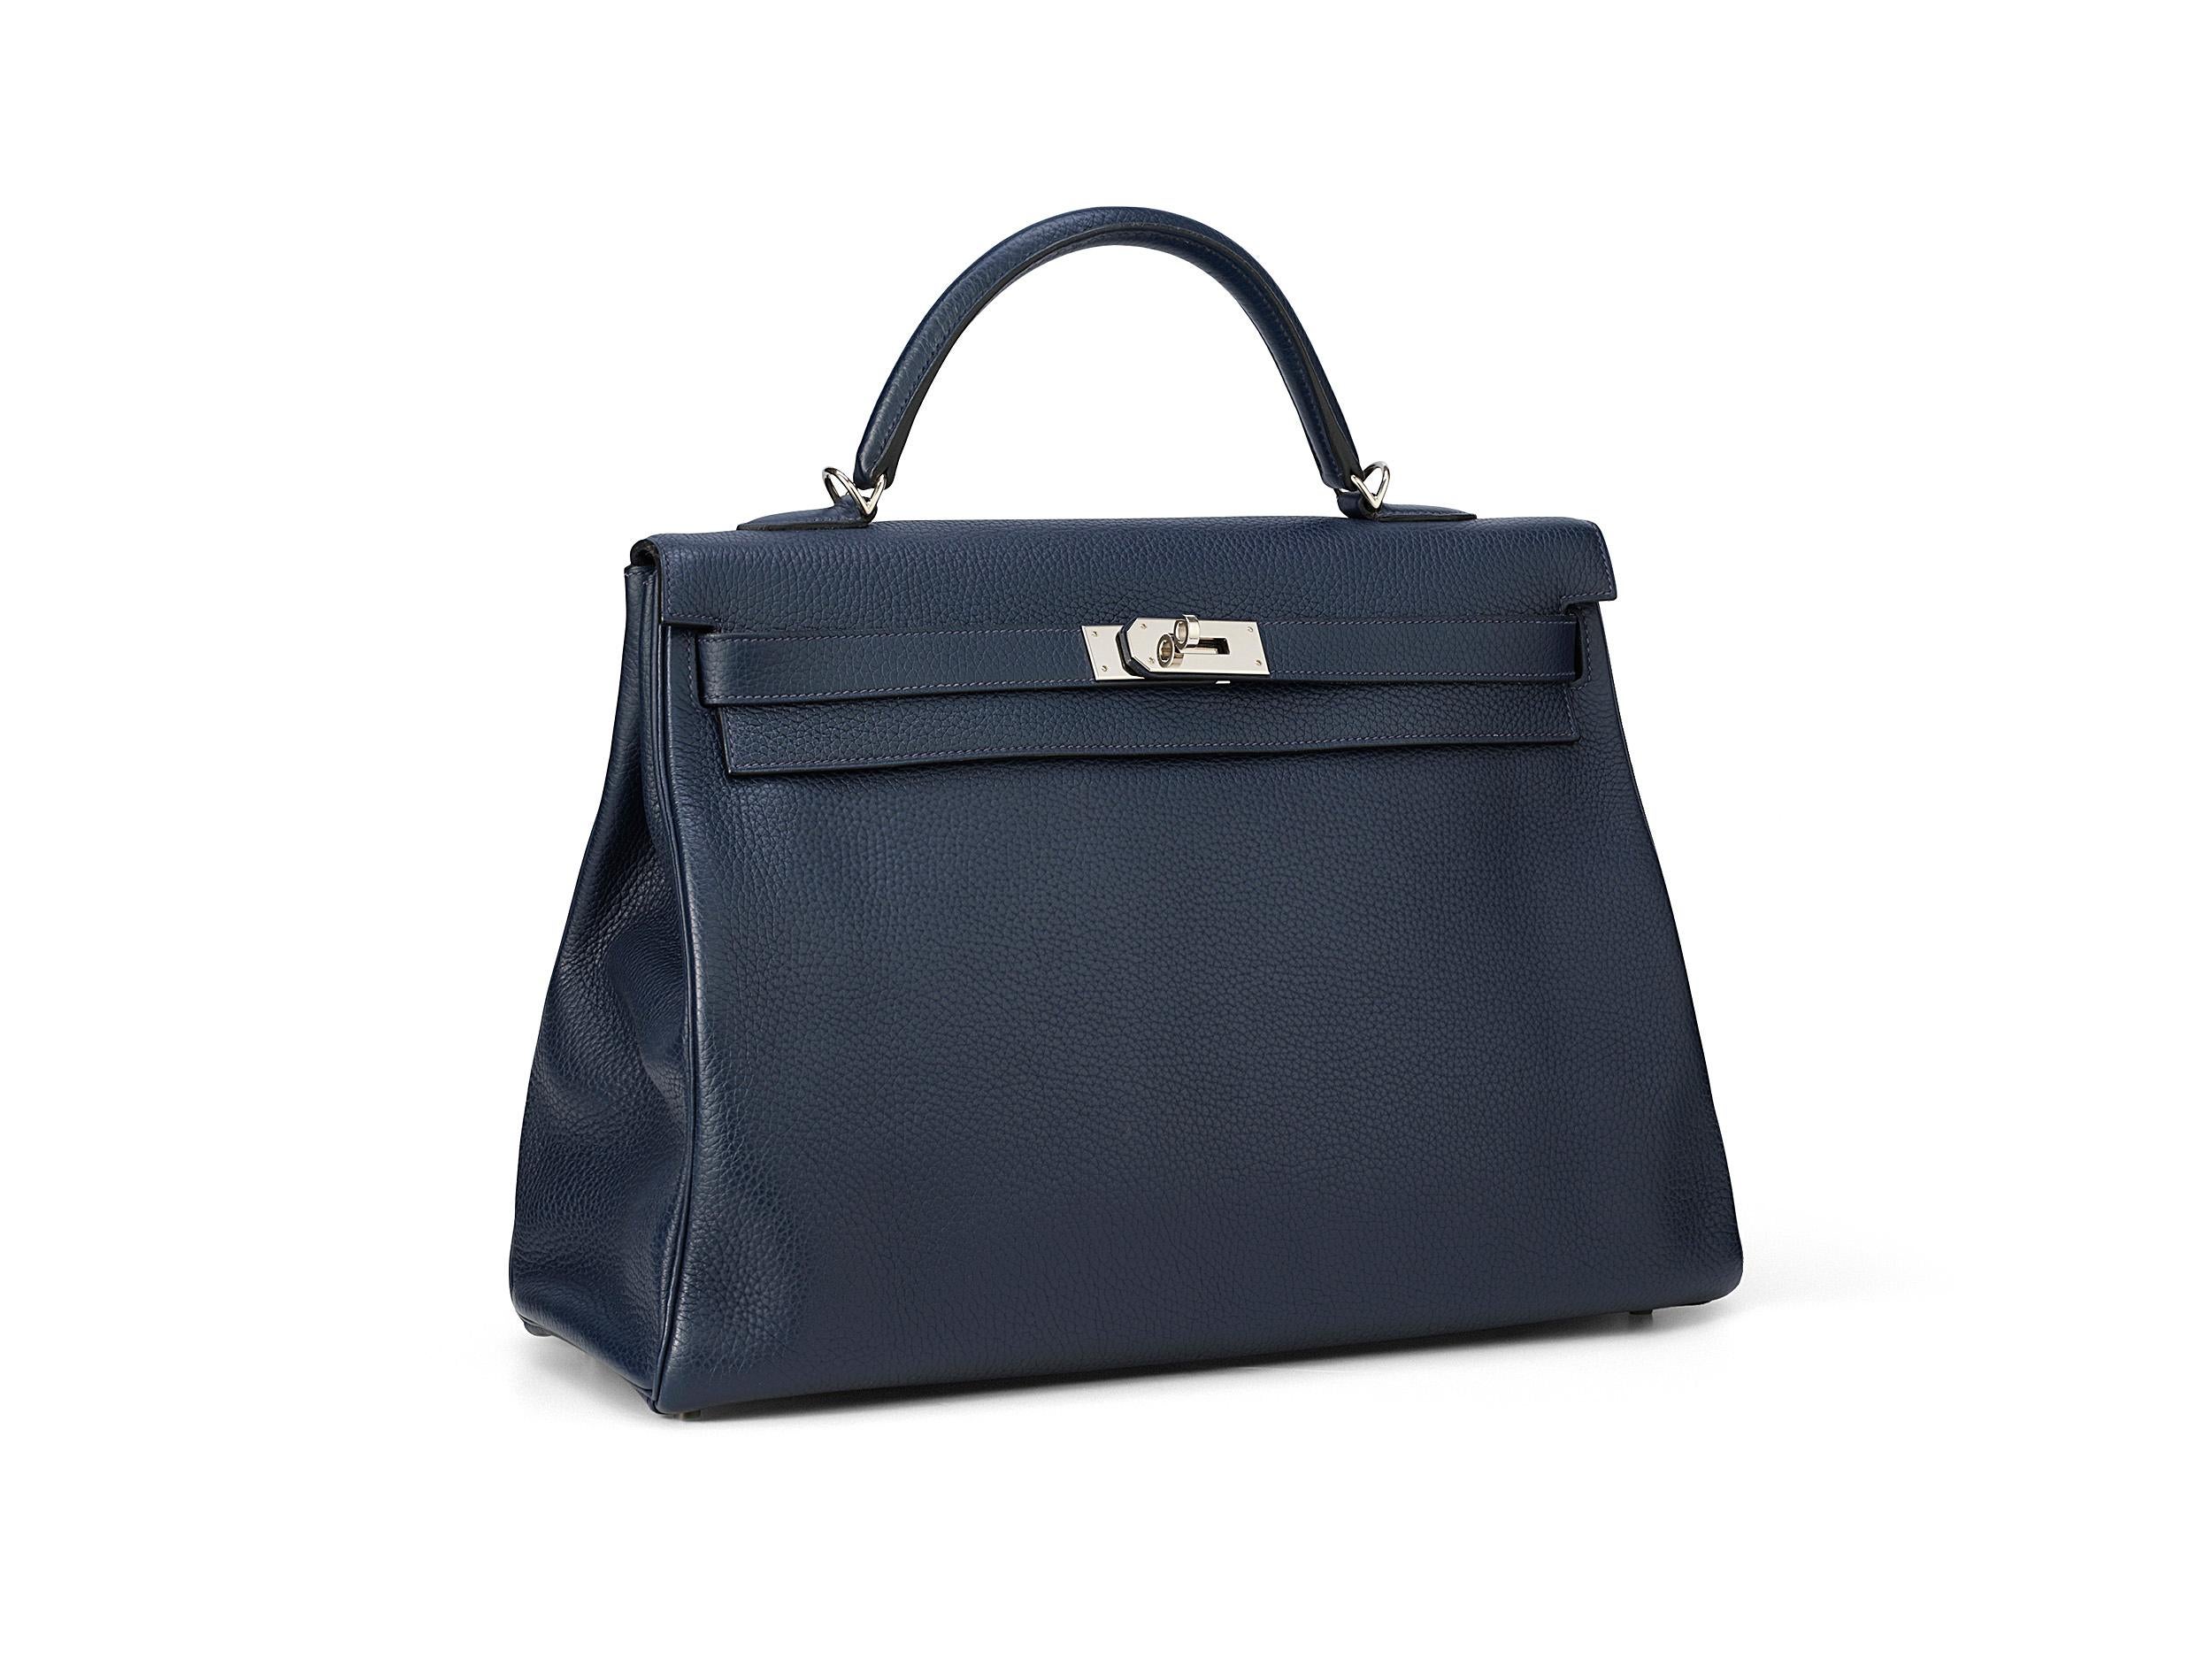 Hermès Kelly HSS 40 in bleu nuit and taurillon clemence leather with palladium hardware. The bag is in excellent condition with minimal marks and comes as full set. 

Bags with a horse shoe stamp (HSS) are customized for special clients.

Stamp A